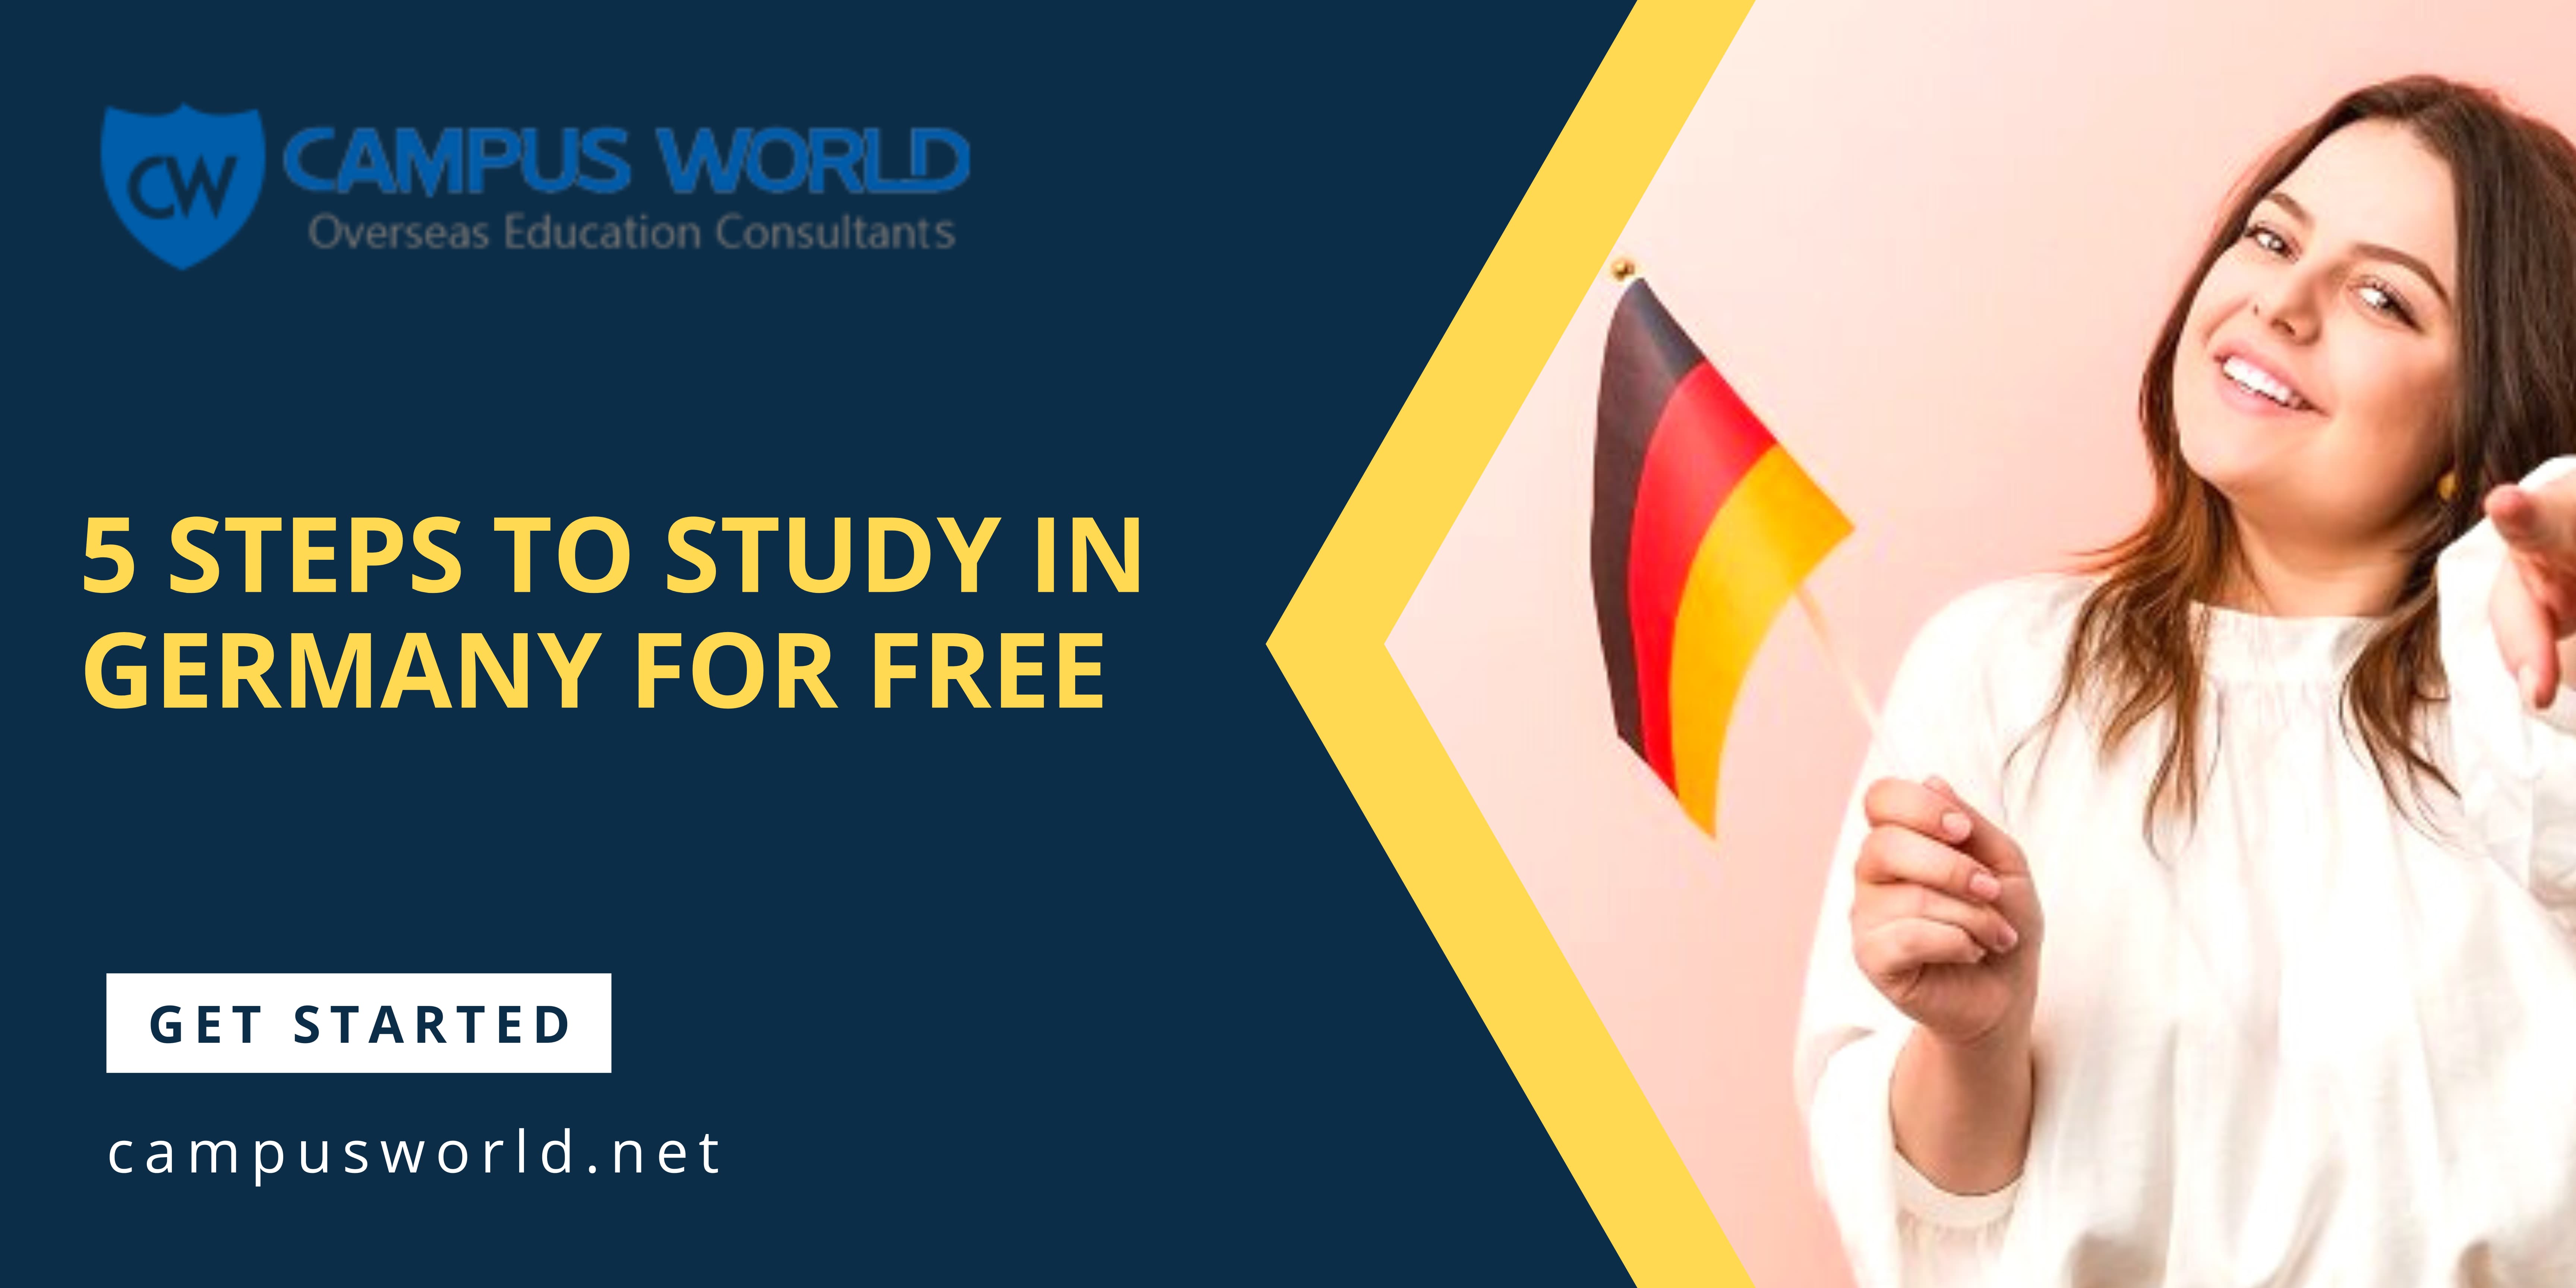 5 Steps to Study in Germany for Free